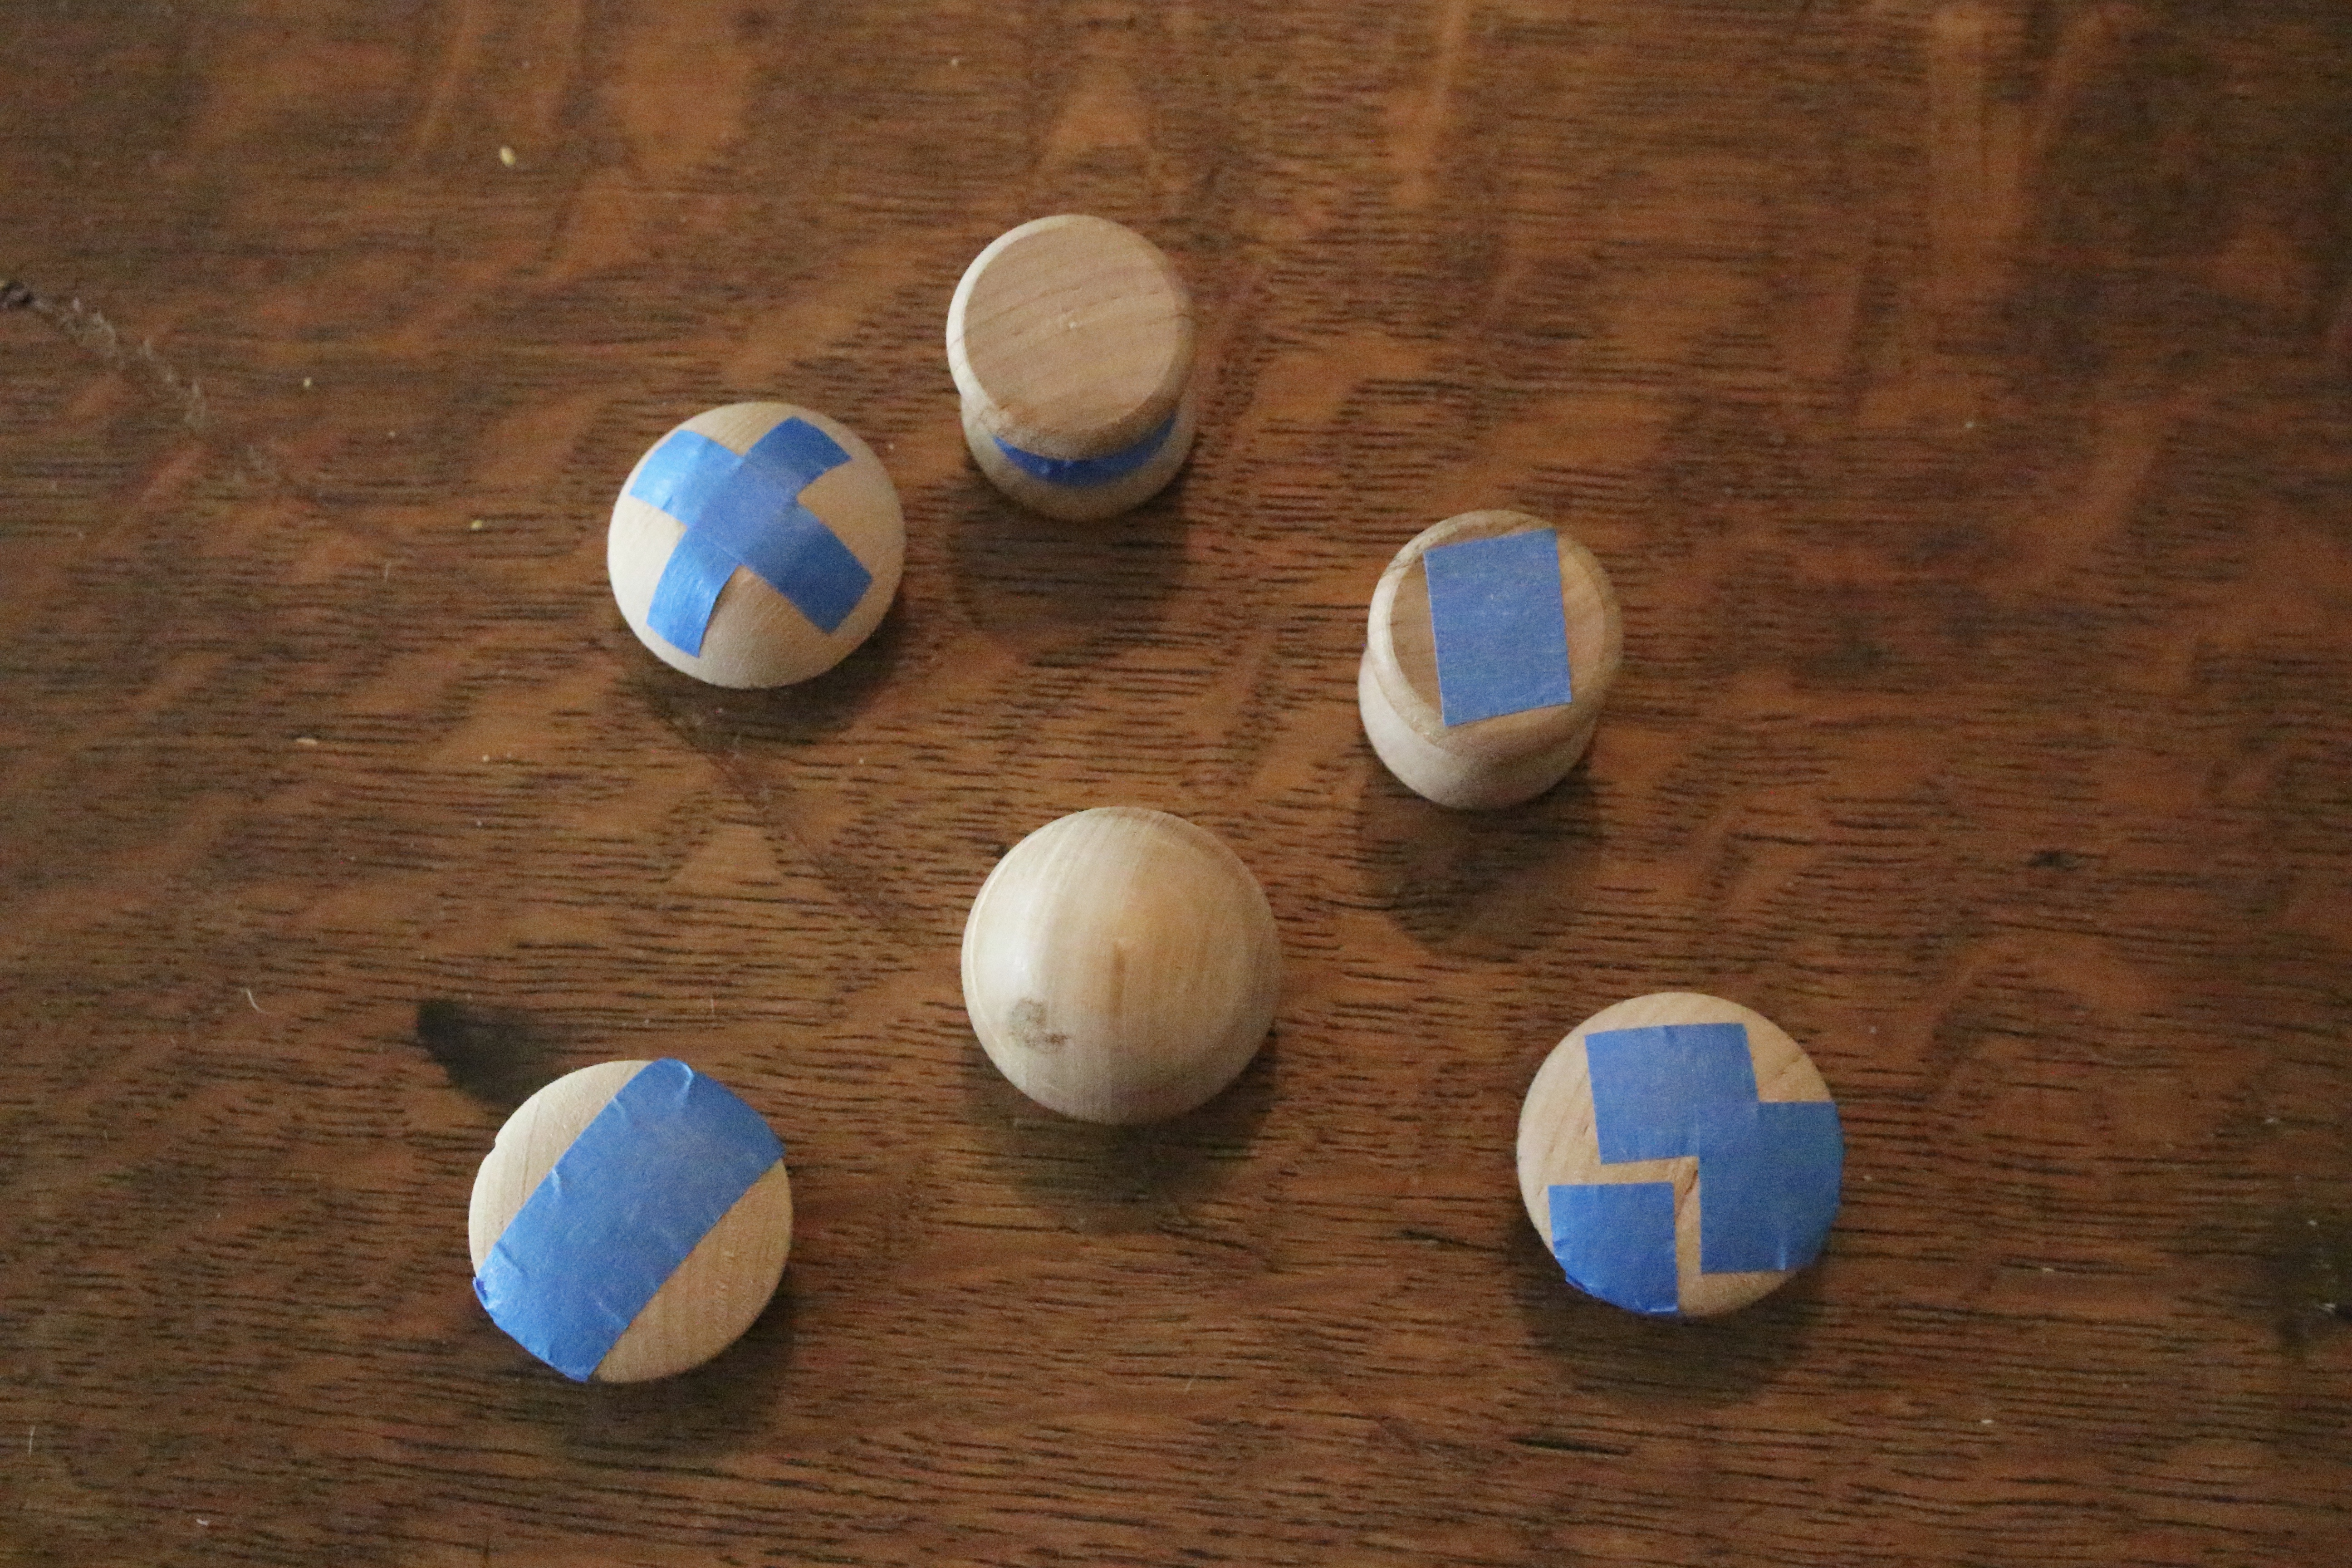 Magnets made from wooden knobs, metallic spray paint, magnets, geometric magnets, wooden knobs, refrigerator magnets, metallics, painted knobs, wooden, DIY designer magnets